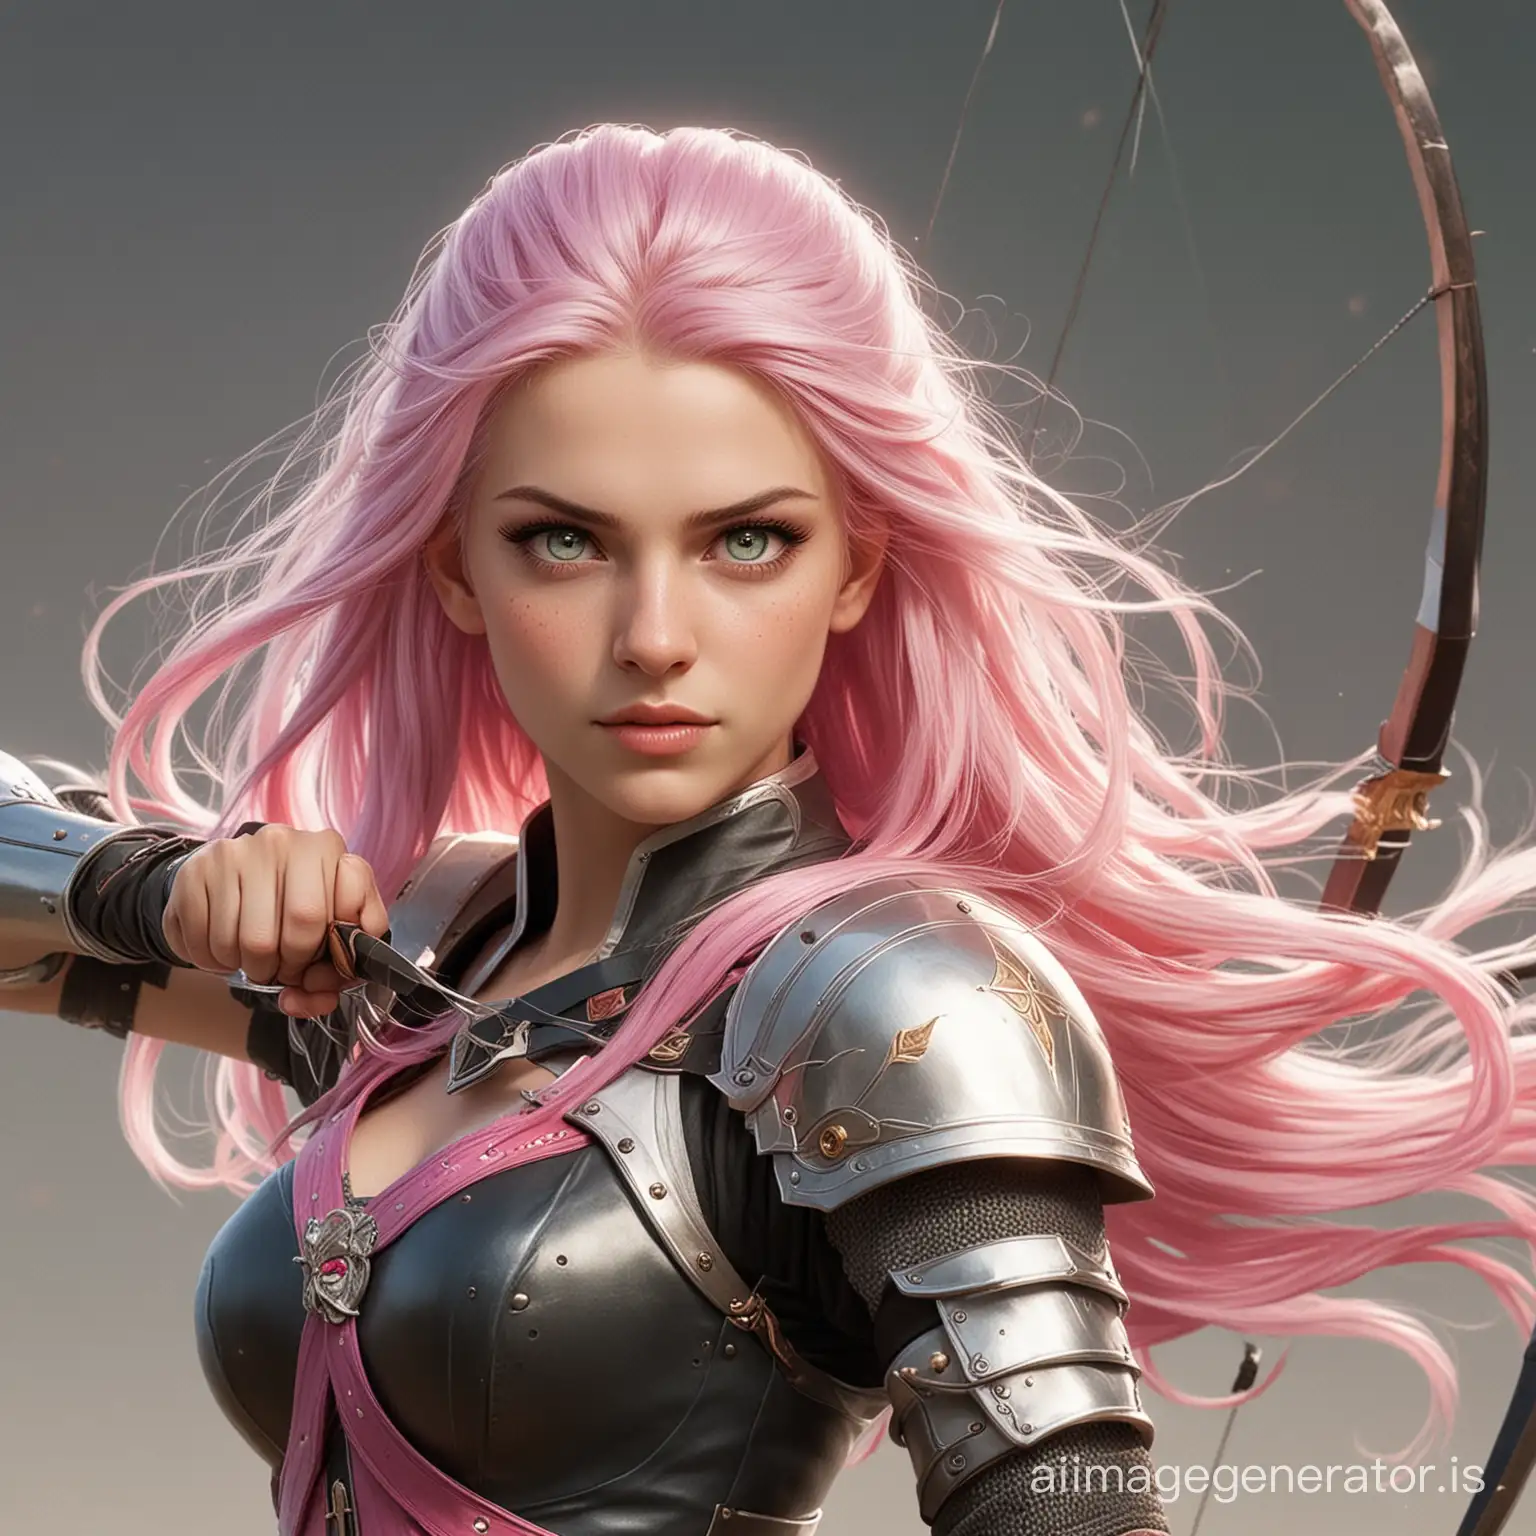 A couple where the female is an archer, has long hair, strtaight hair pink hair, and green eyes. While the male is a swordman, bald, white hair, and red eyes.